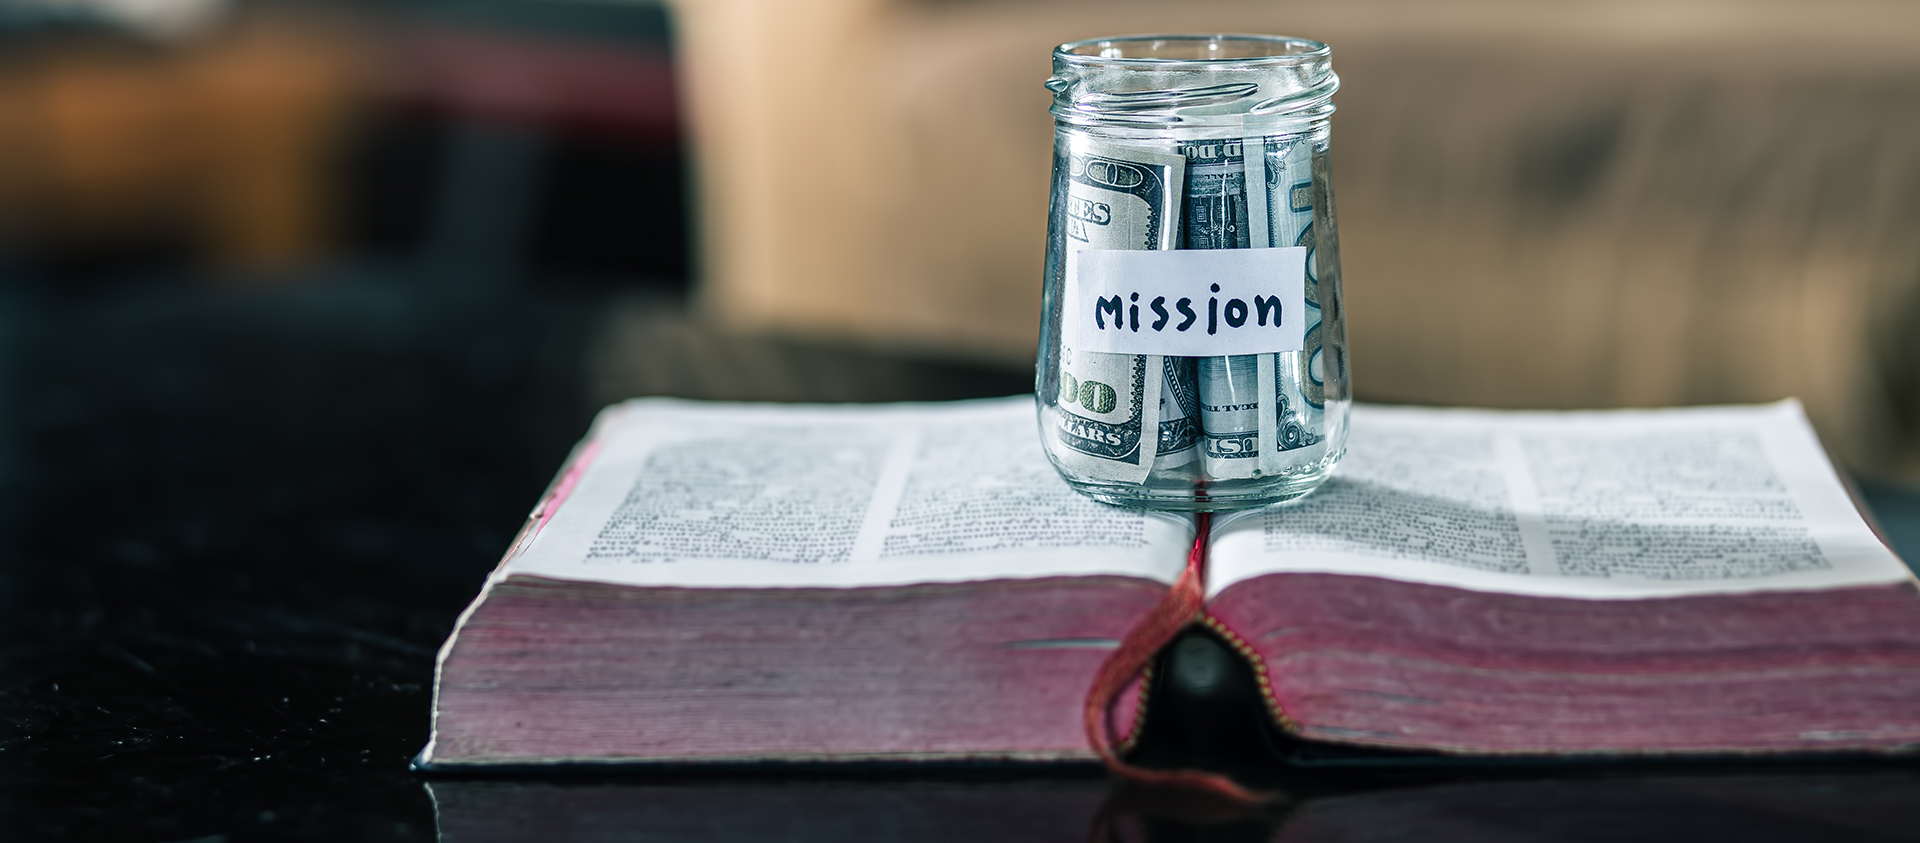 Give to Missions